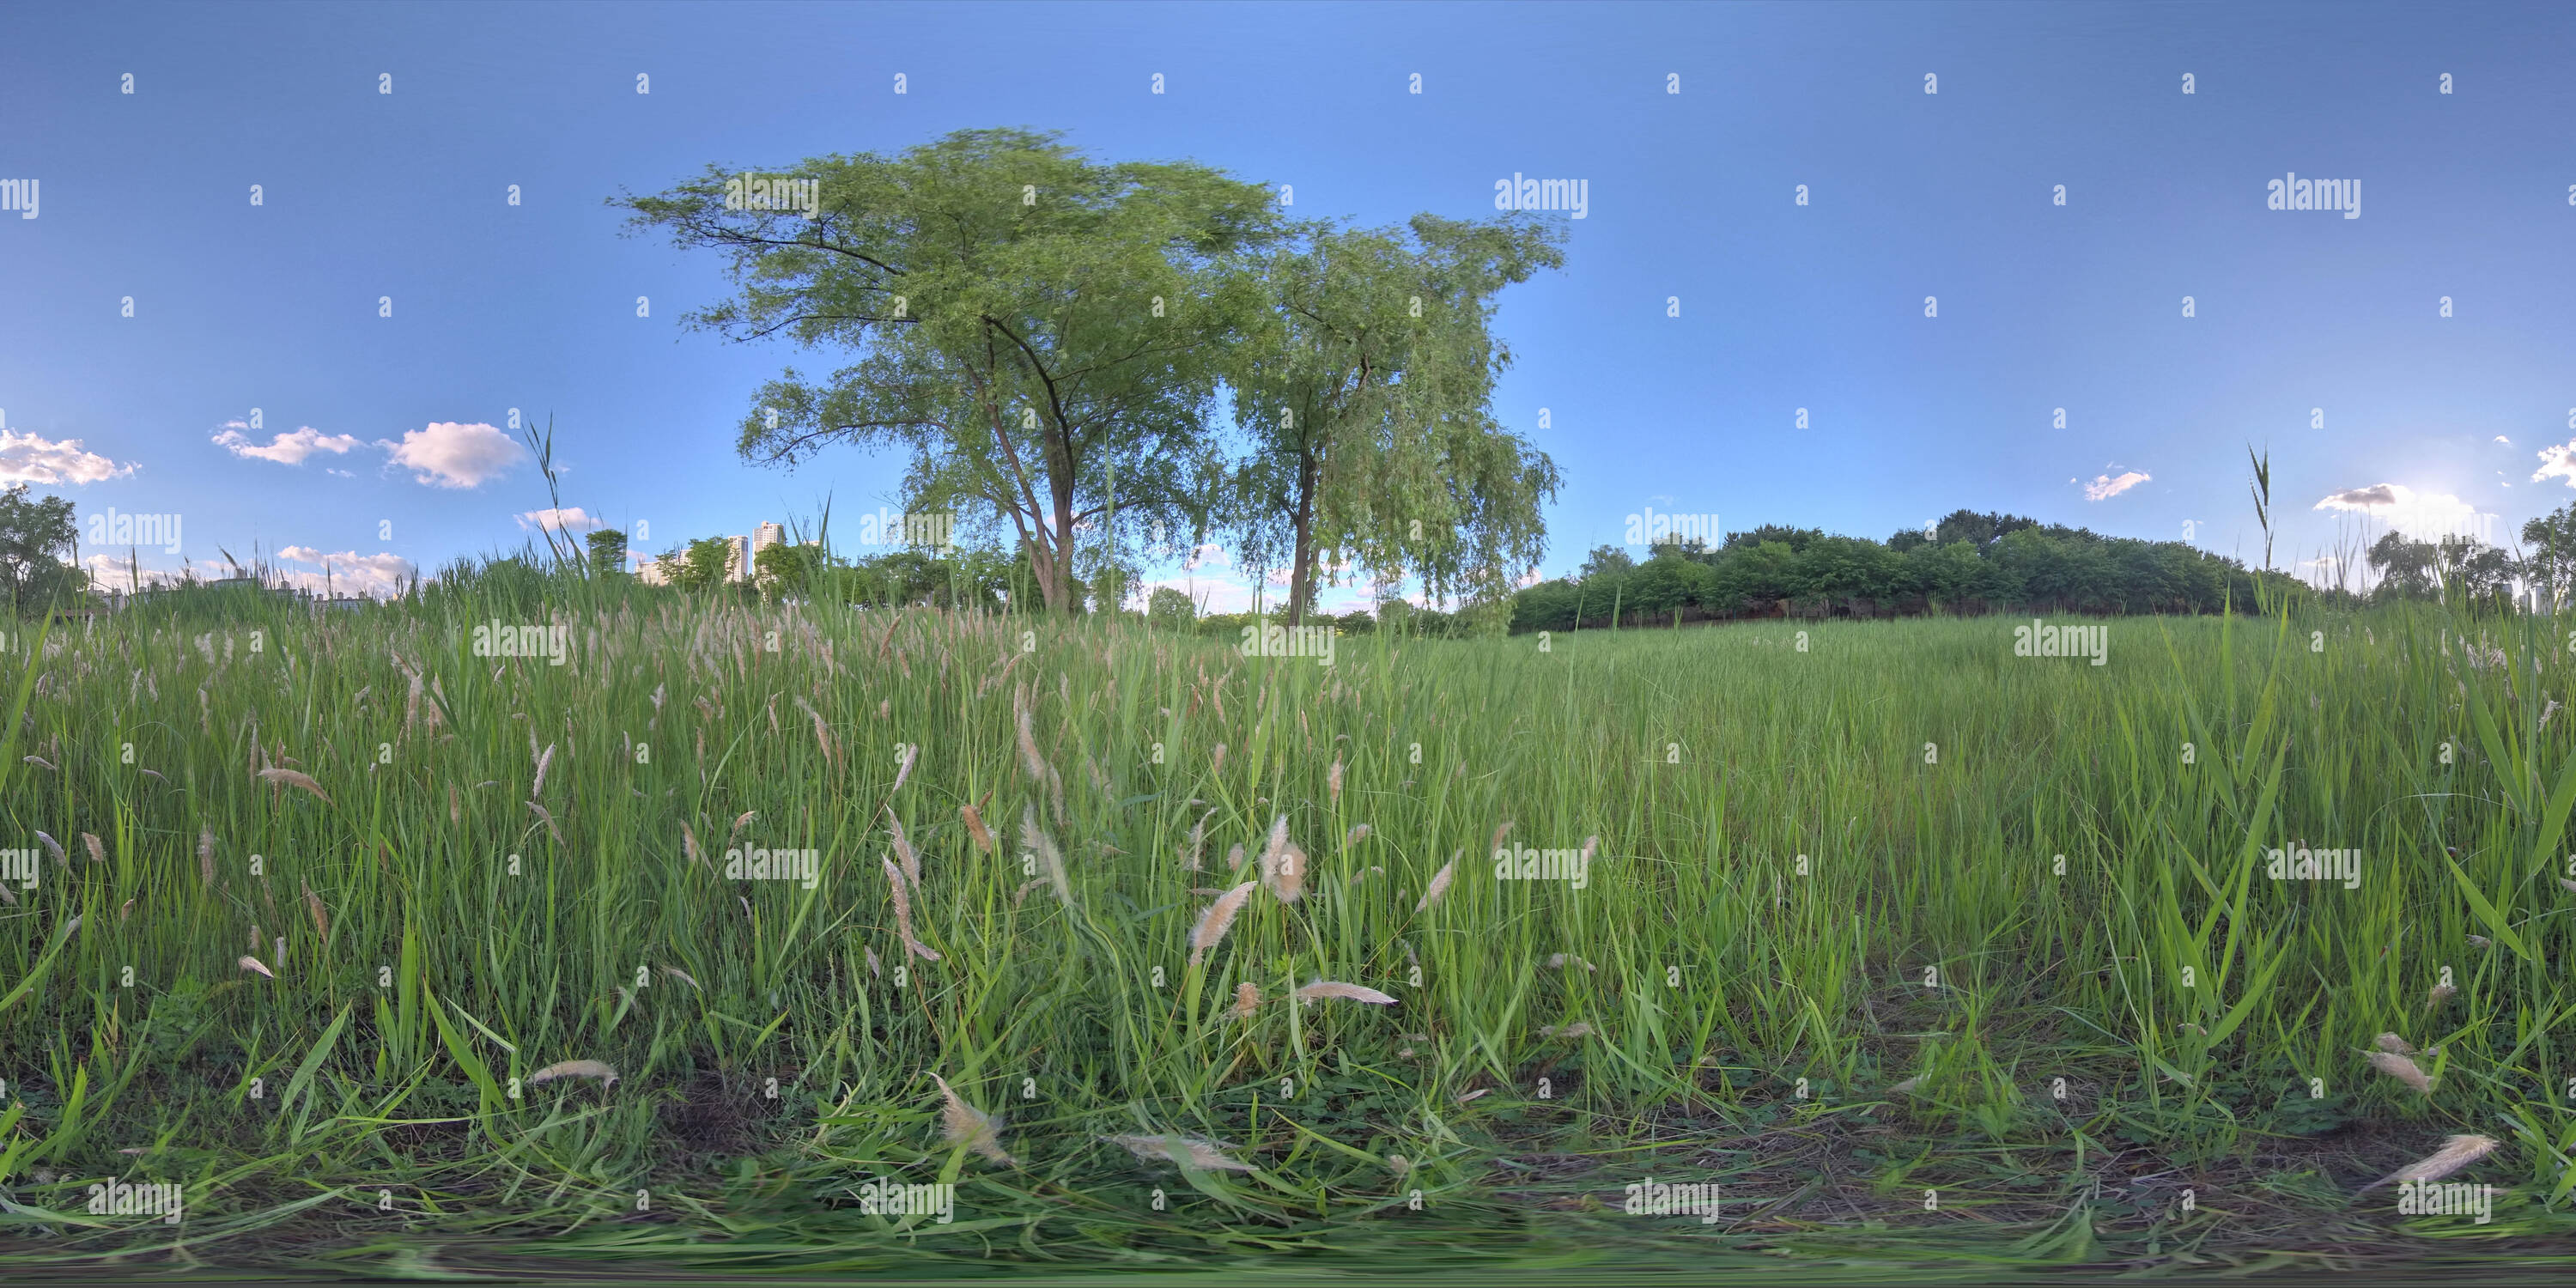 360 degree panoramic view of Ansan, South Korea - 7 June 2019. Panorama 360 degrees view in park. Forest and Park 360 image, VR AR content.